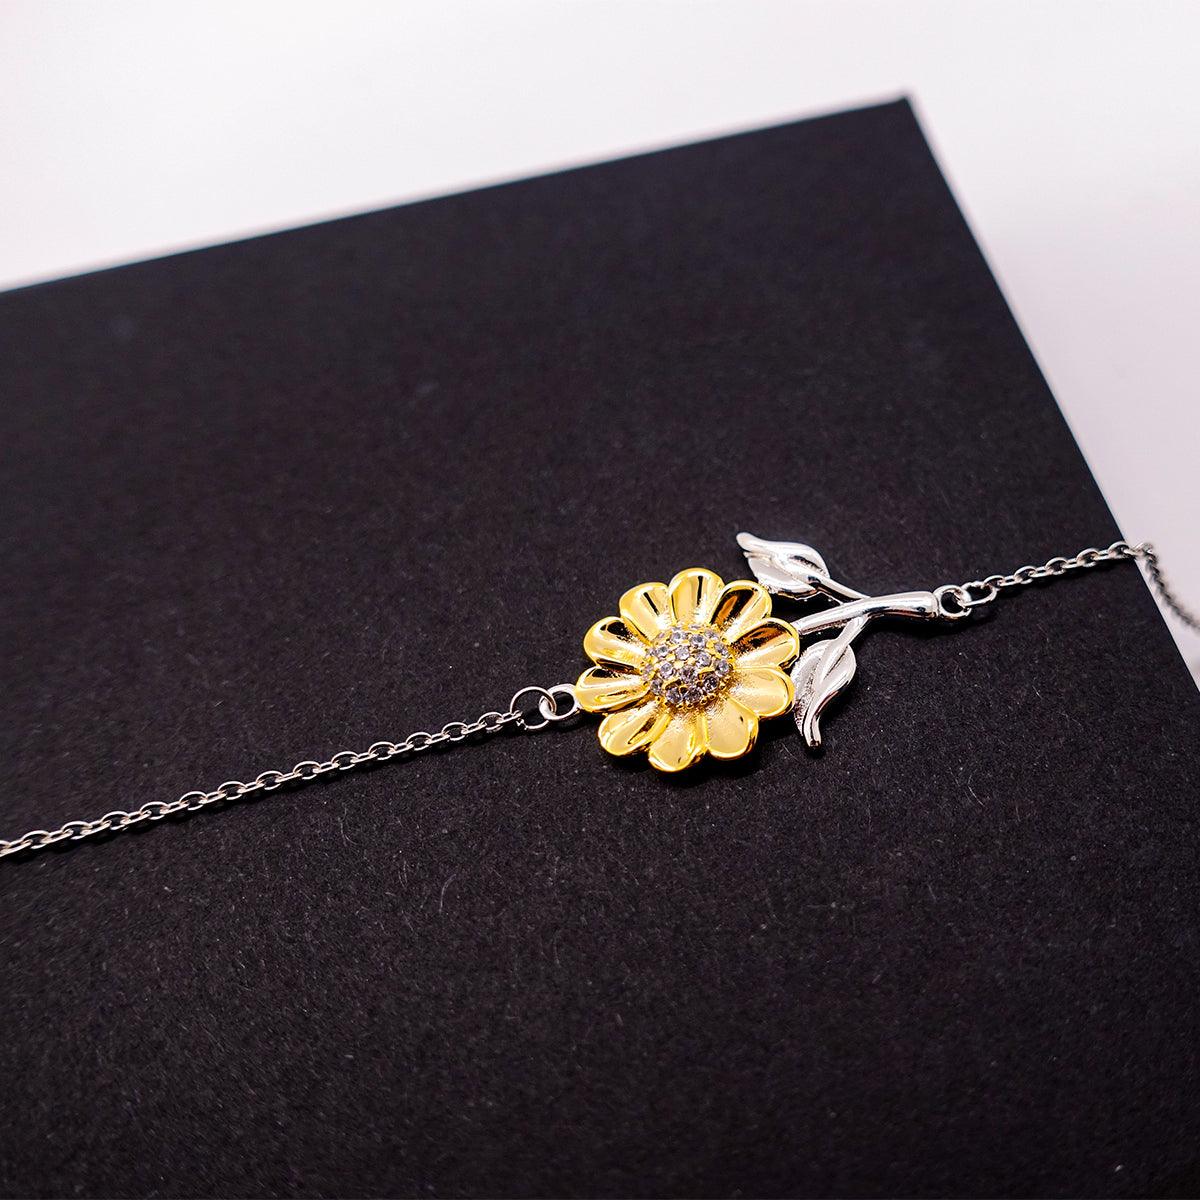 Janitor Sunflower Bracelet - Thanks for being who you are - Birthday Christmas Jewelry Gifts Coworkers Colleague Boss - Mallard Moon Gift Shop